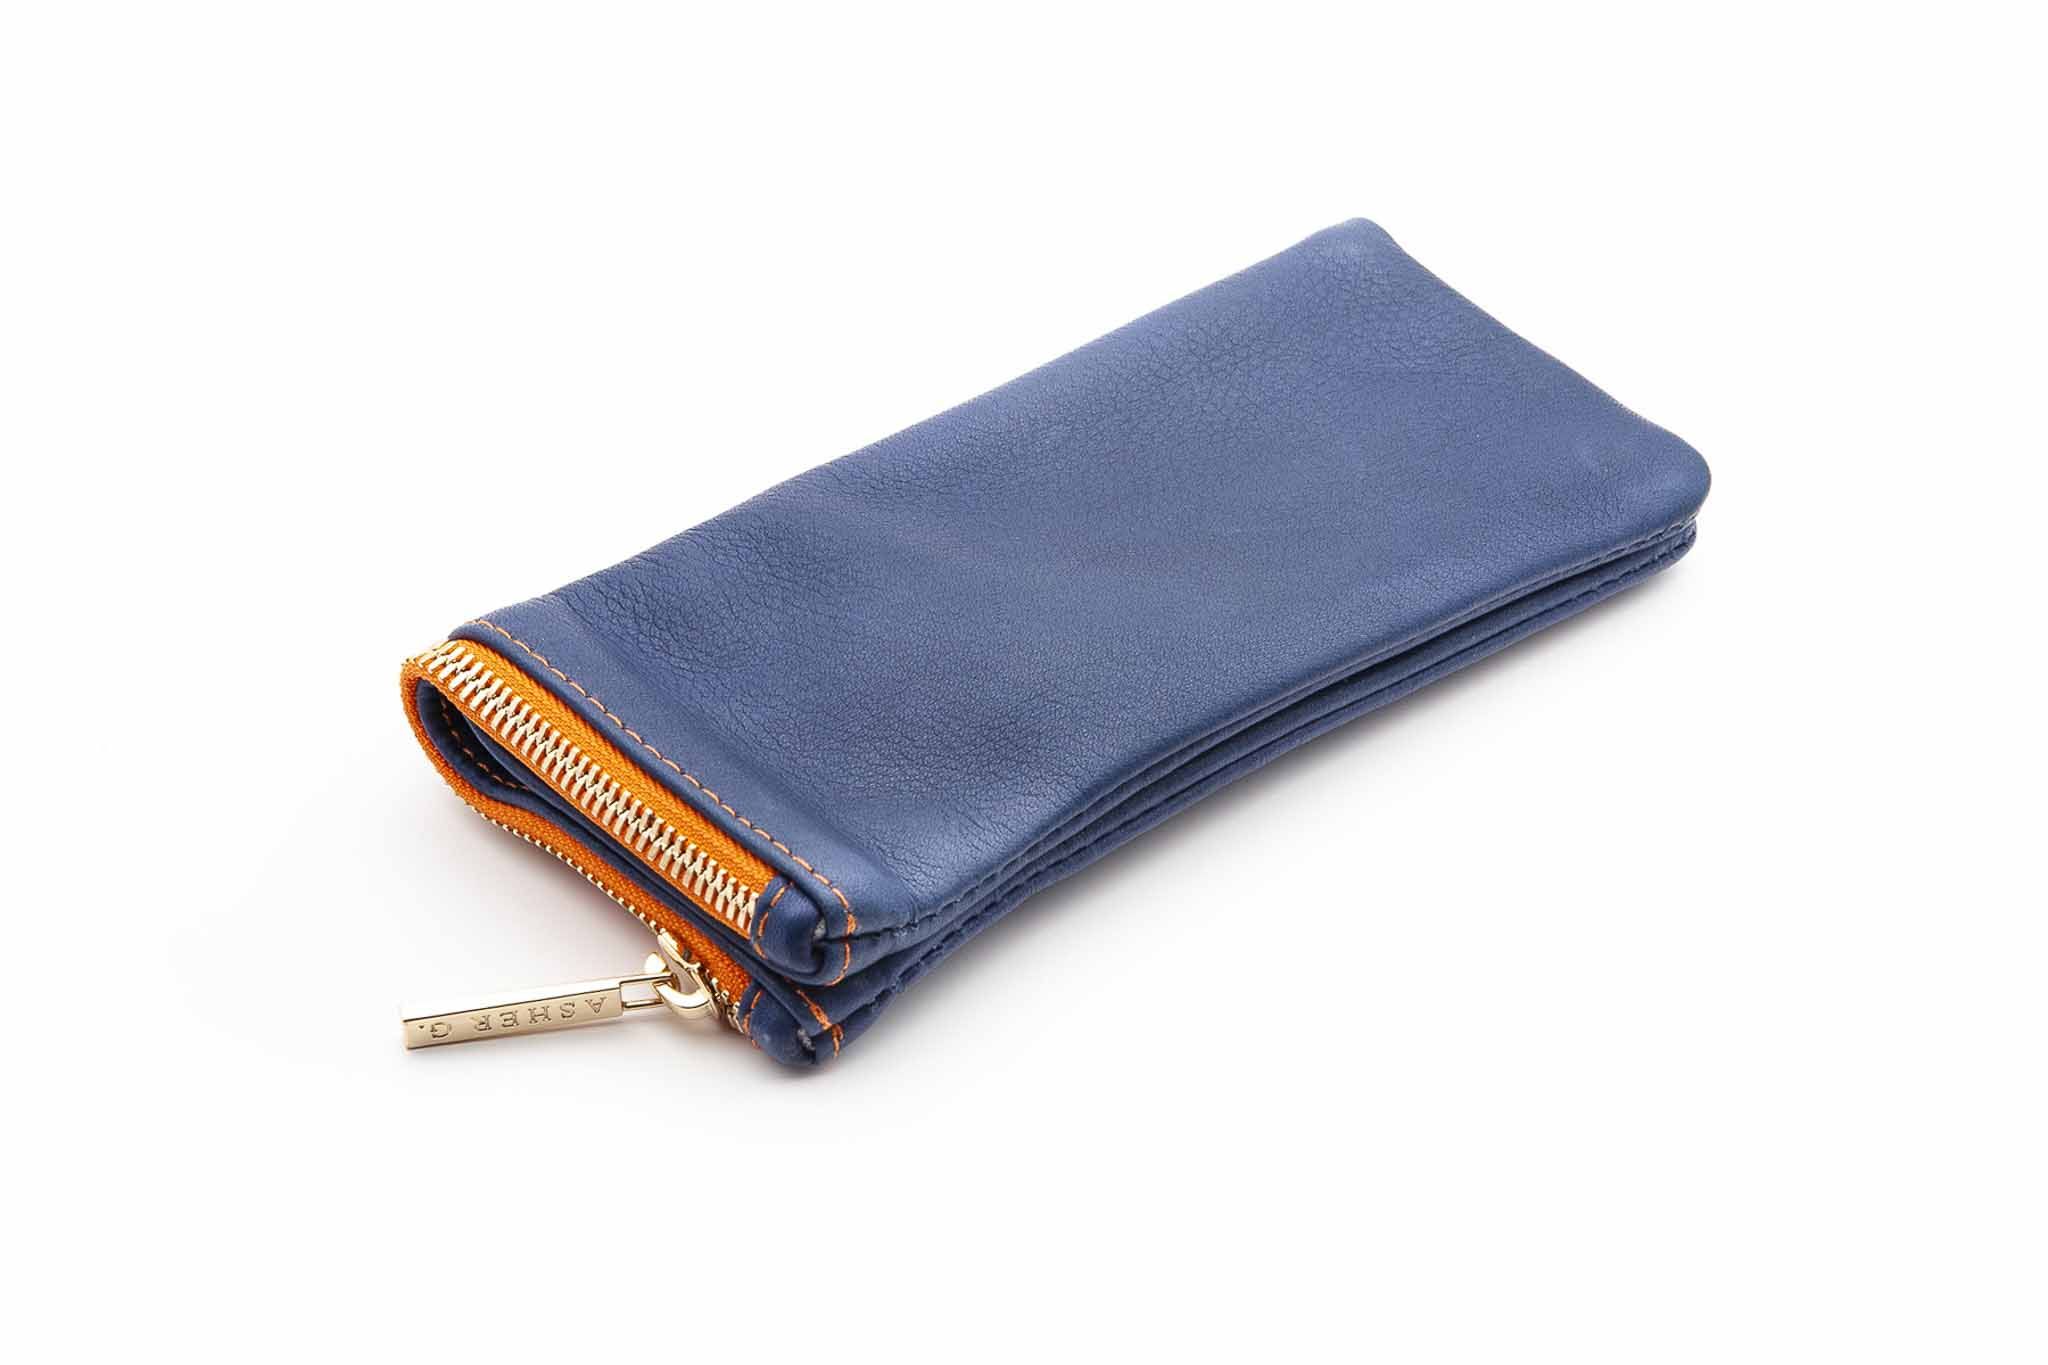 Soft Leather Pouch ACCS001 NVY